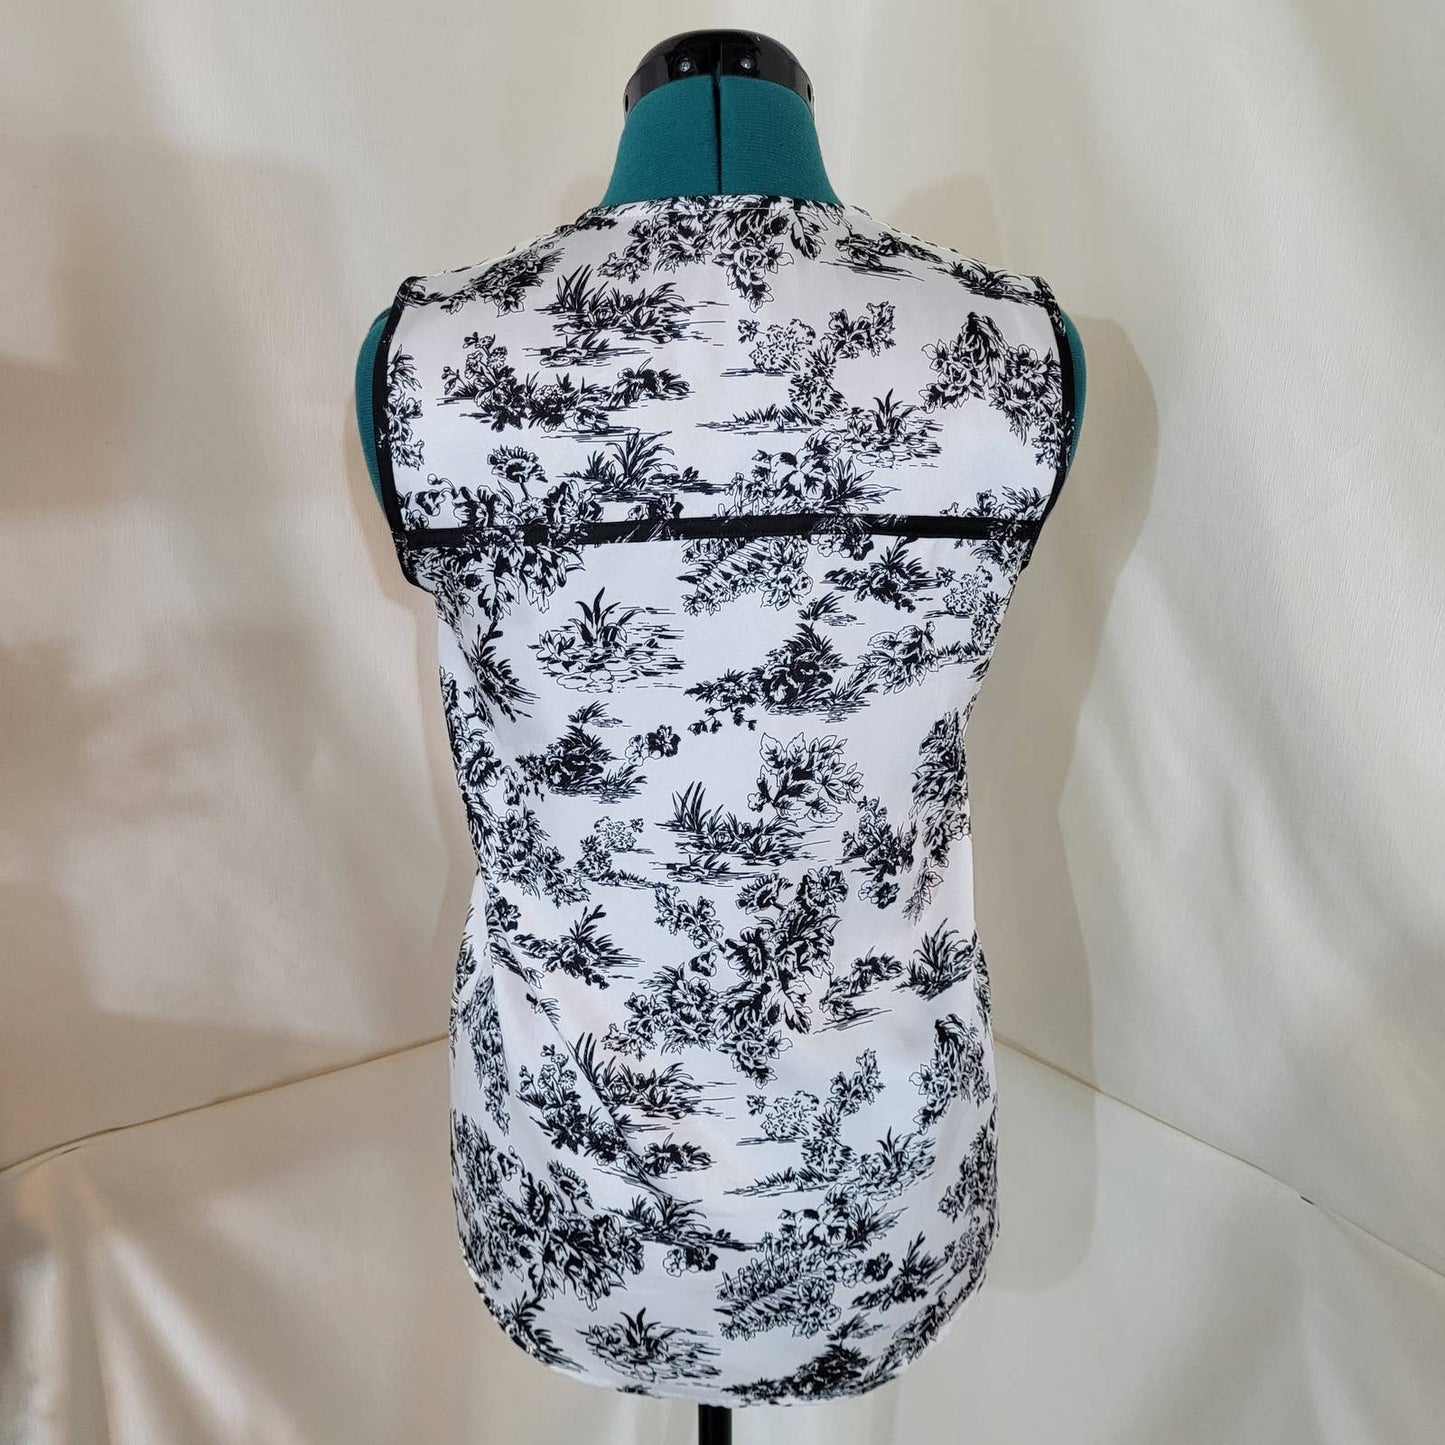 Judith & Charles Black and White Floral Sleeveless Top - Size 2